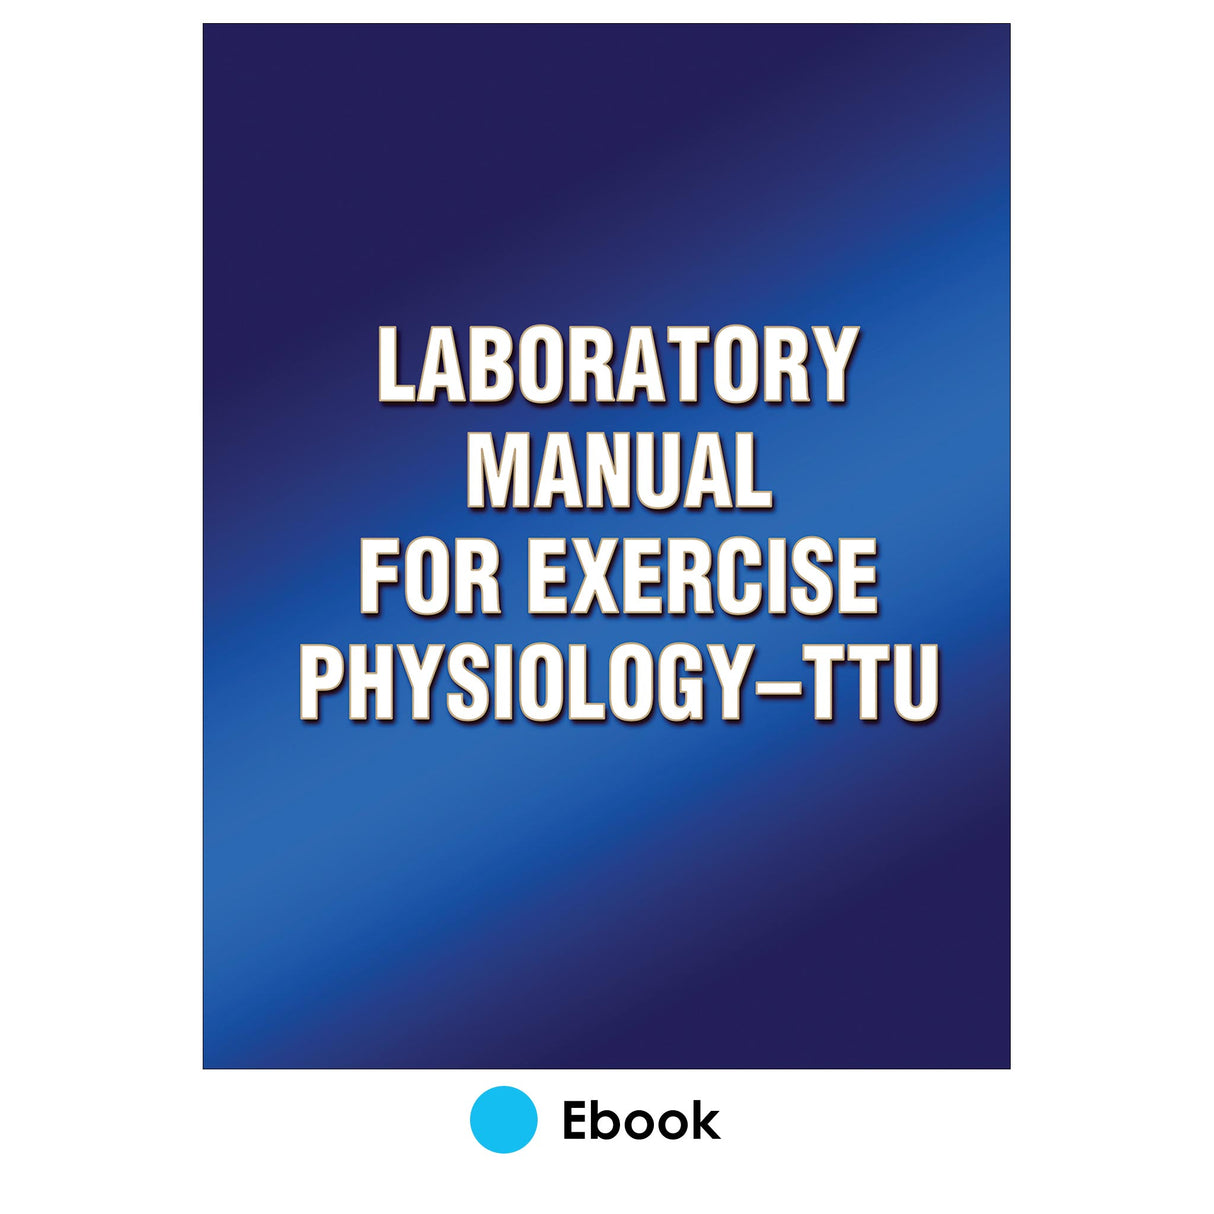 Laboratory Manual for Exercise Physiology-TTU